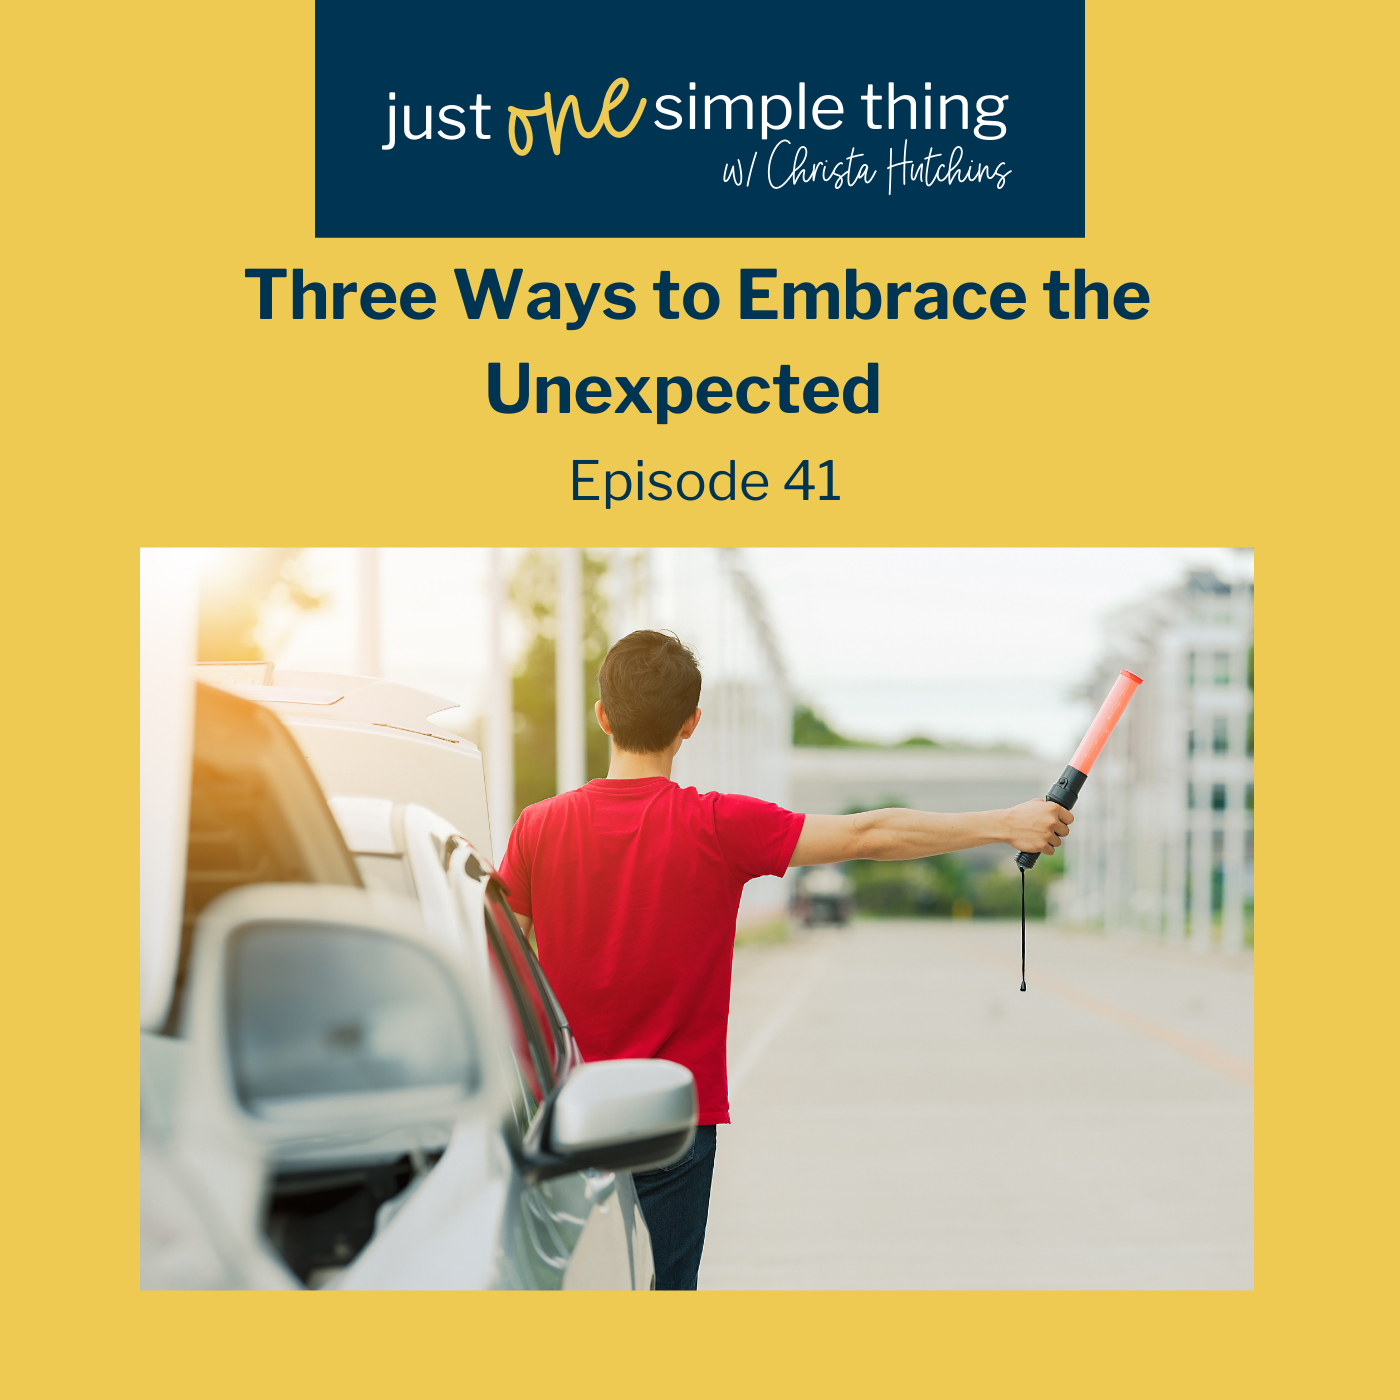 Three Ways to Embrace the Unexpected